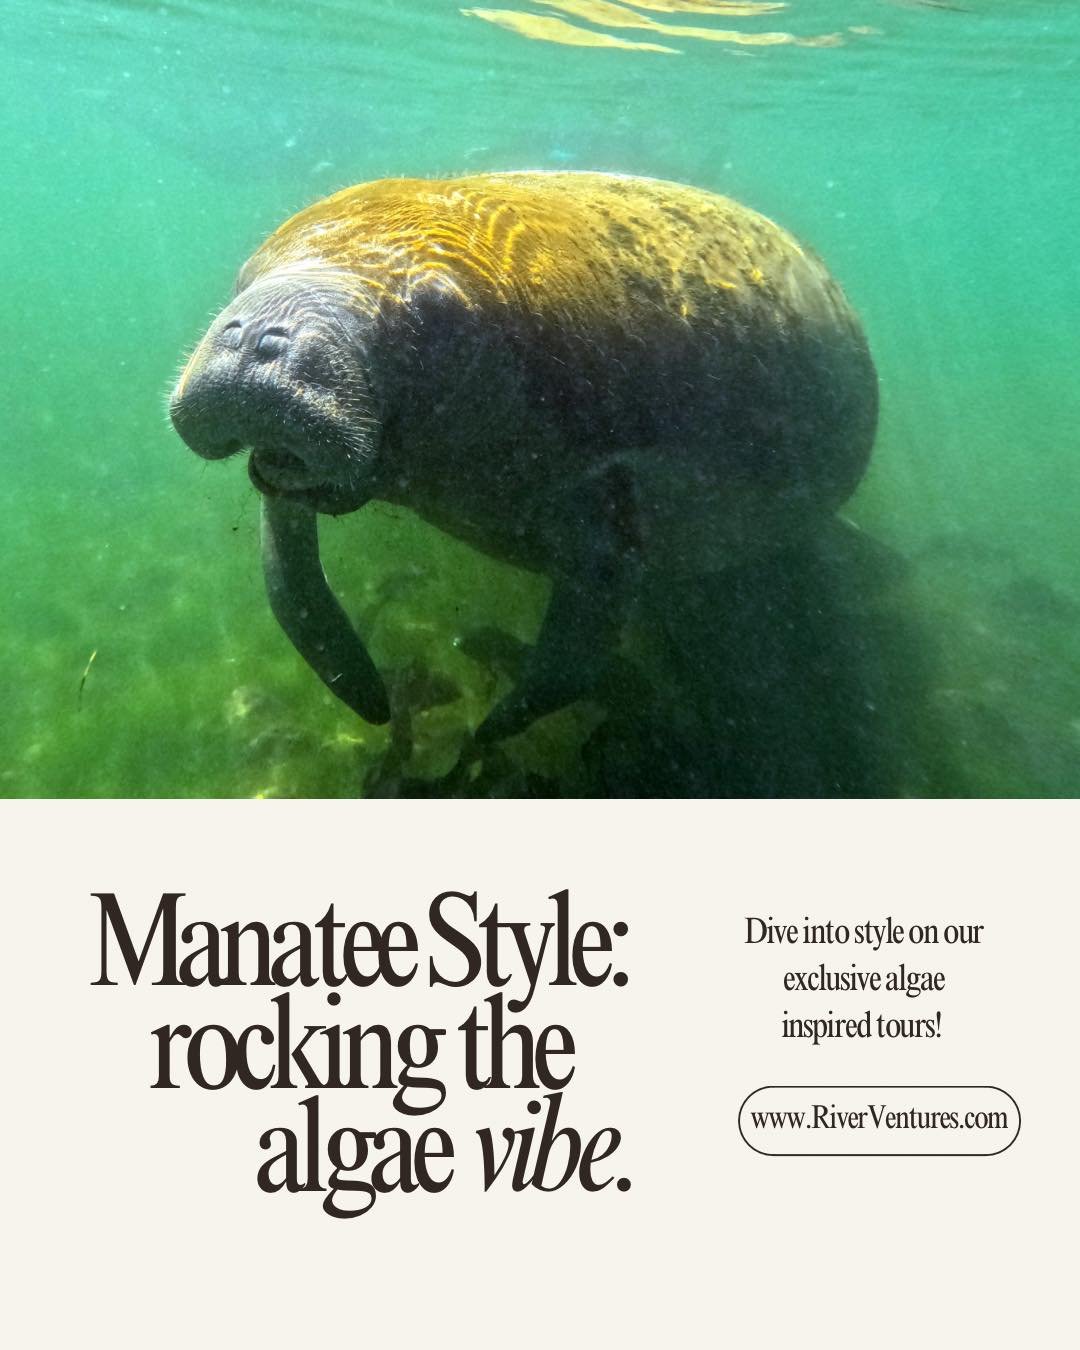 Ever wonder what kind of style manatees have? Dive into 'Manatee Chic' and find out! Join our exclusive tour for an aquatic adventure like no other! 🌊💙 #ManateeStyle #FashionForwardness #AquaticAdventure